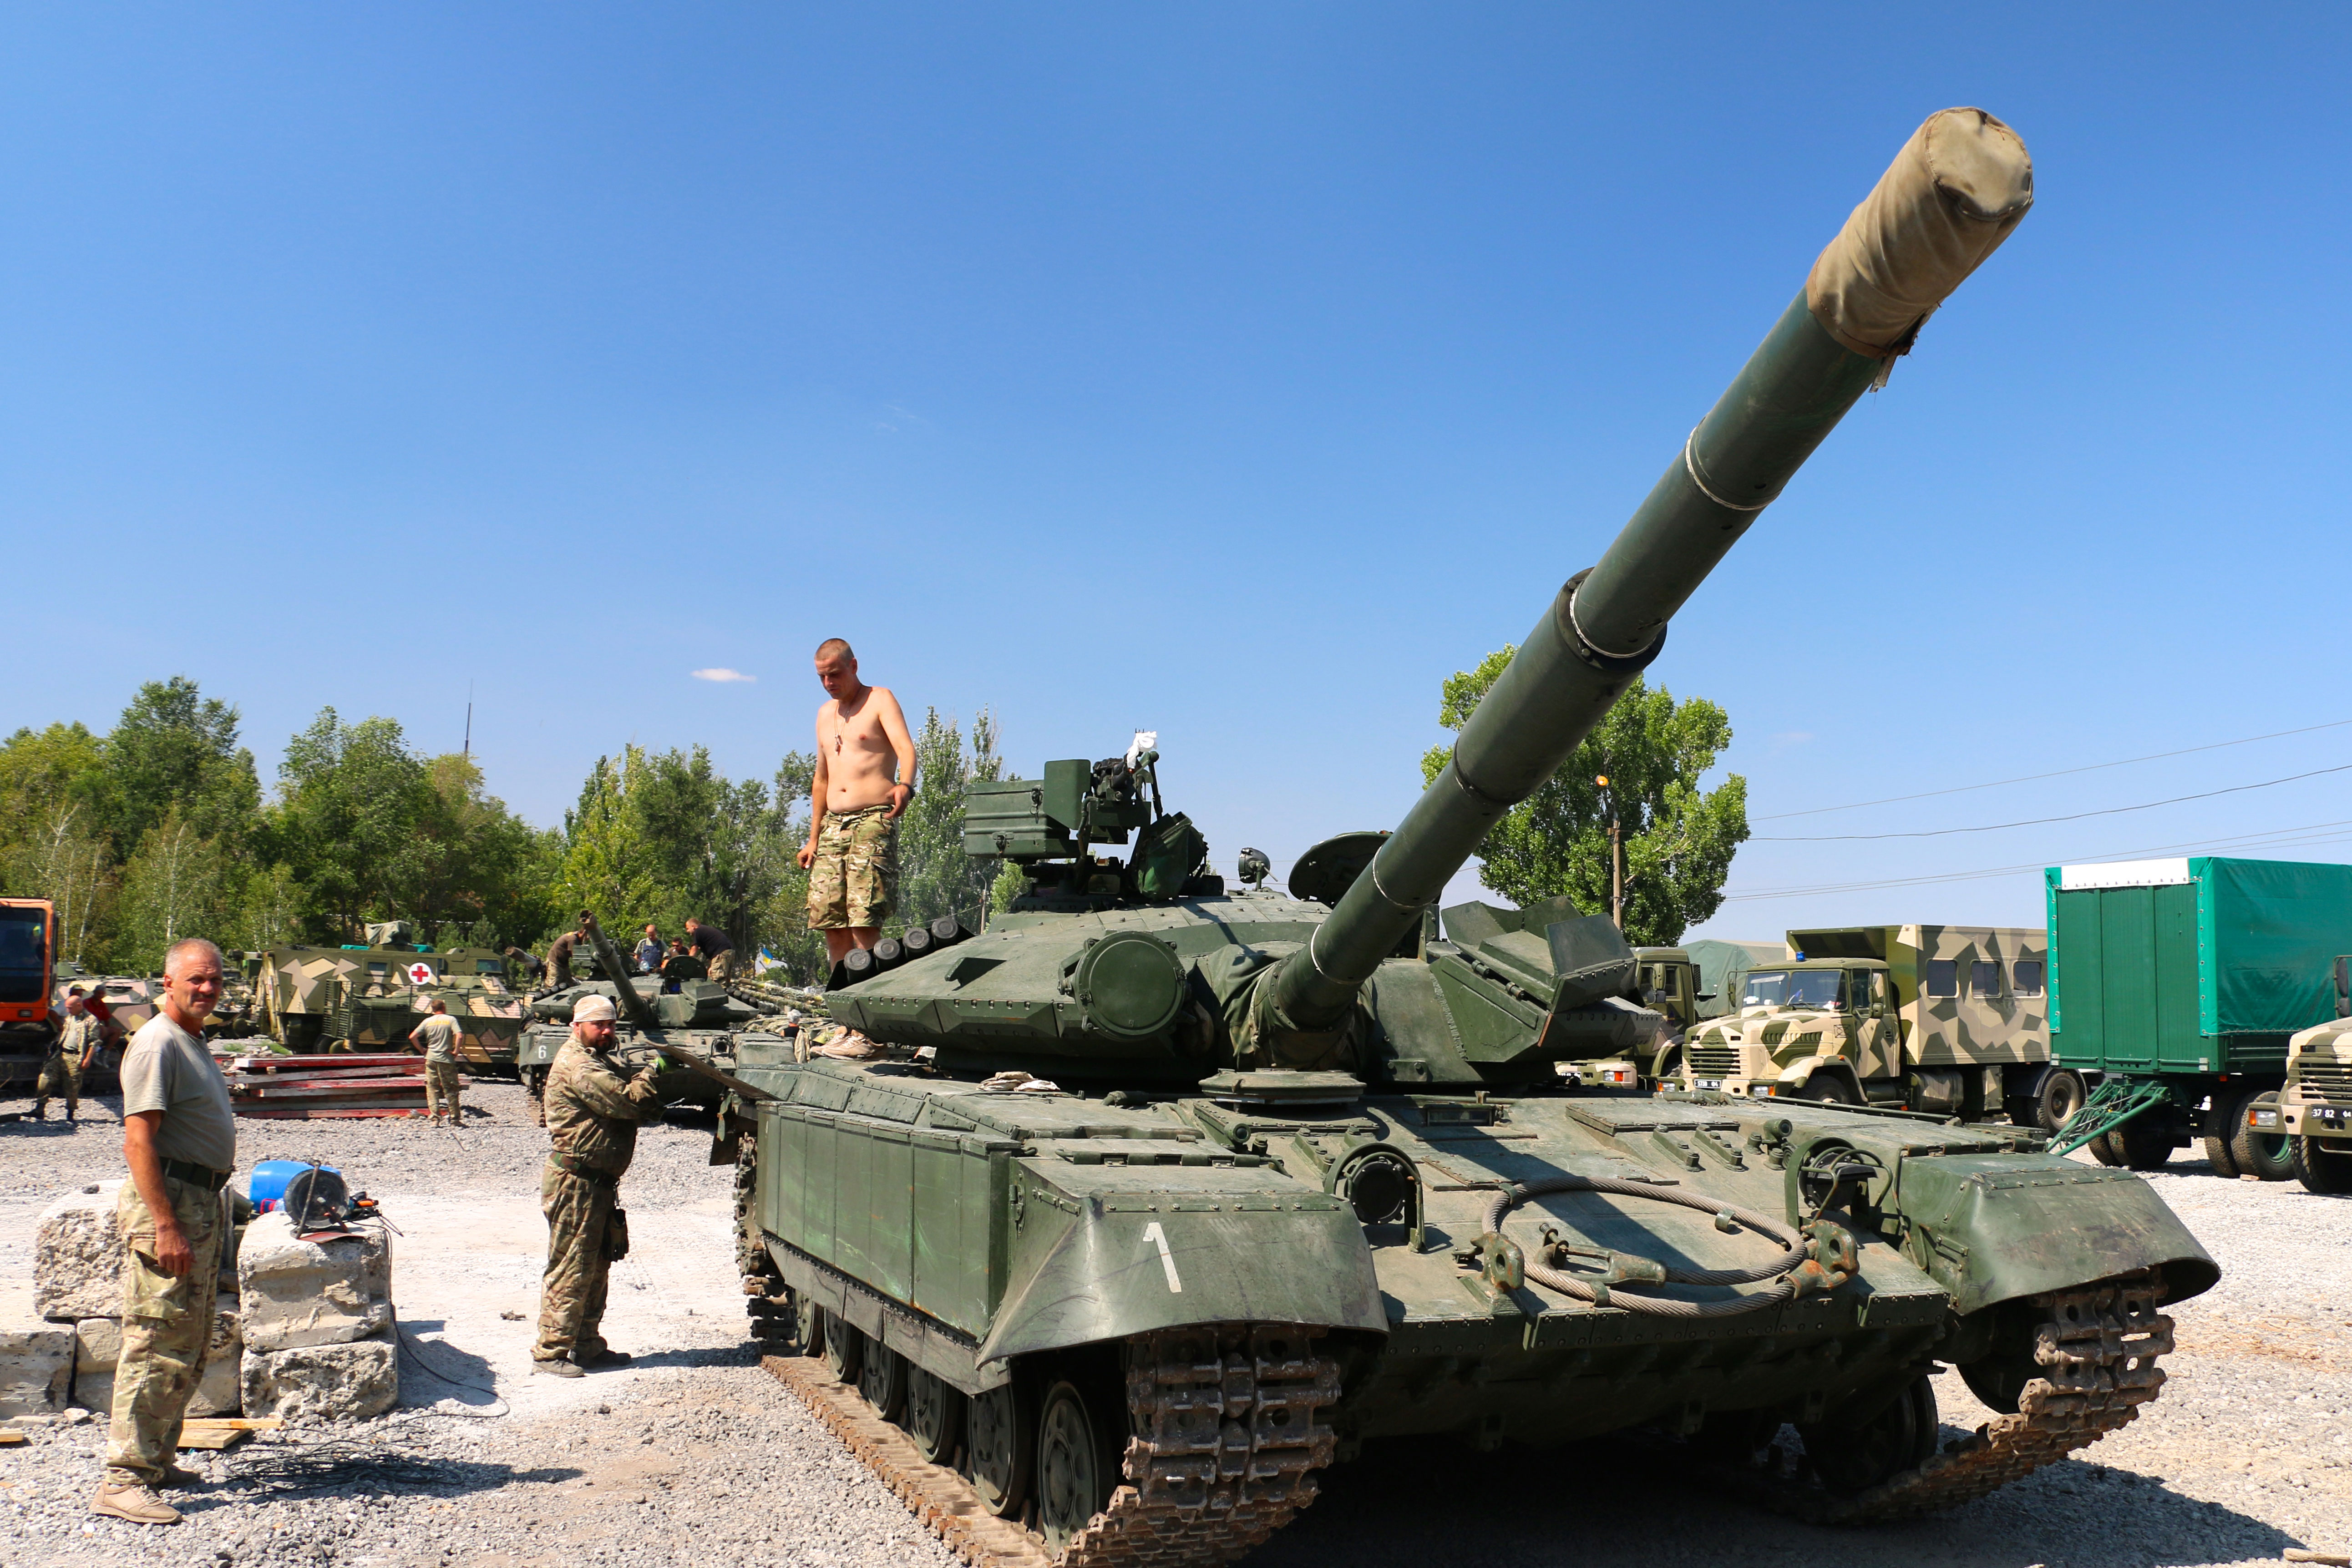 In 2014, some feared a combined Russian-separatist offensive could split Ukraine in two.